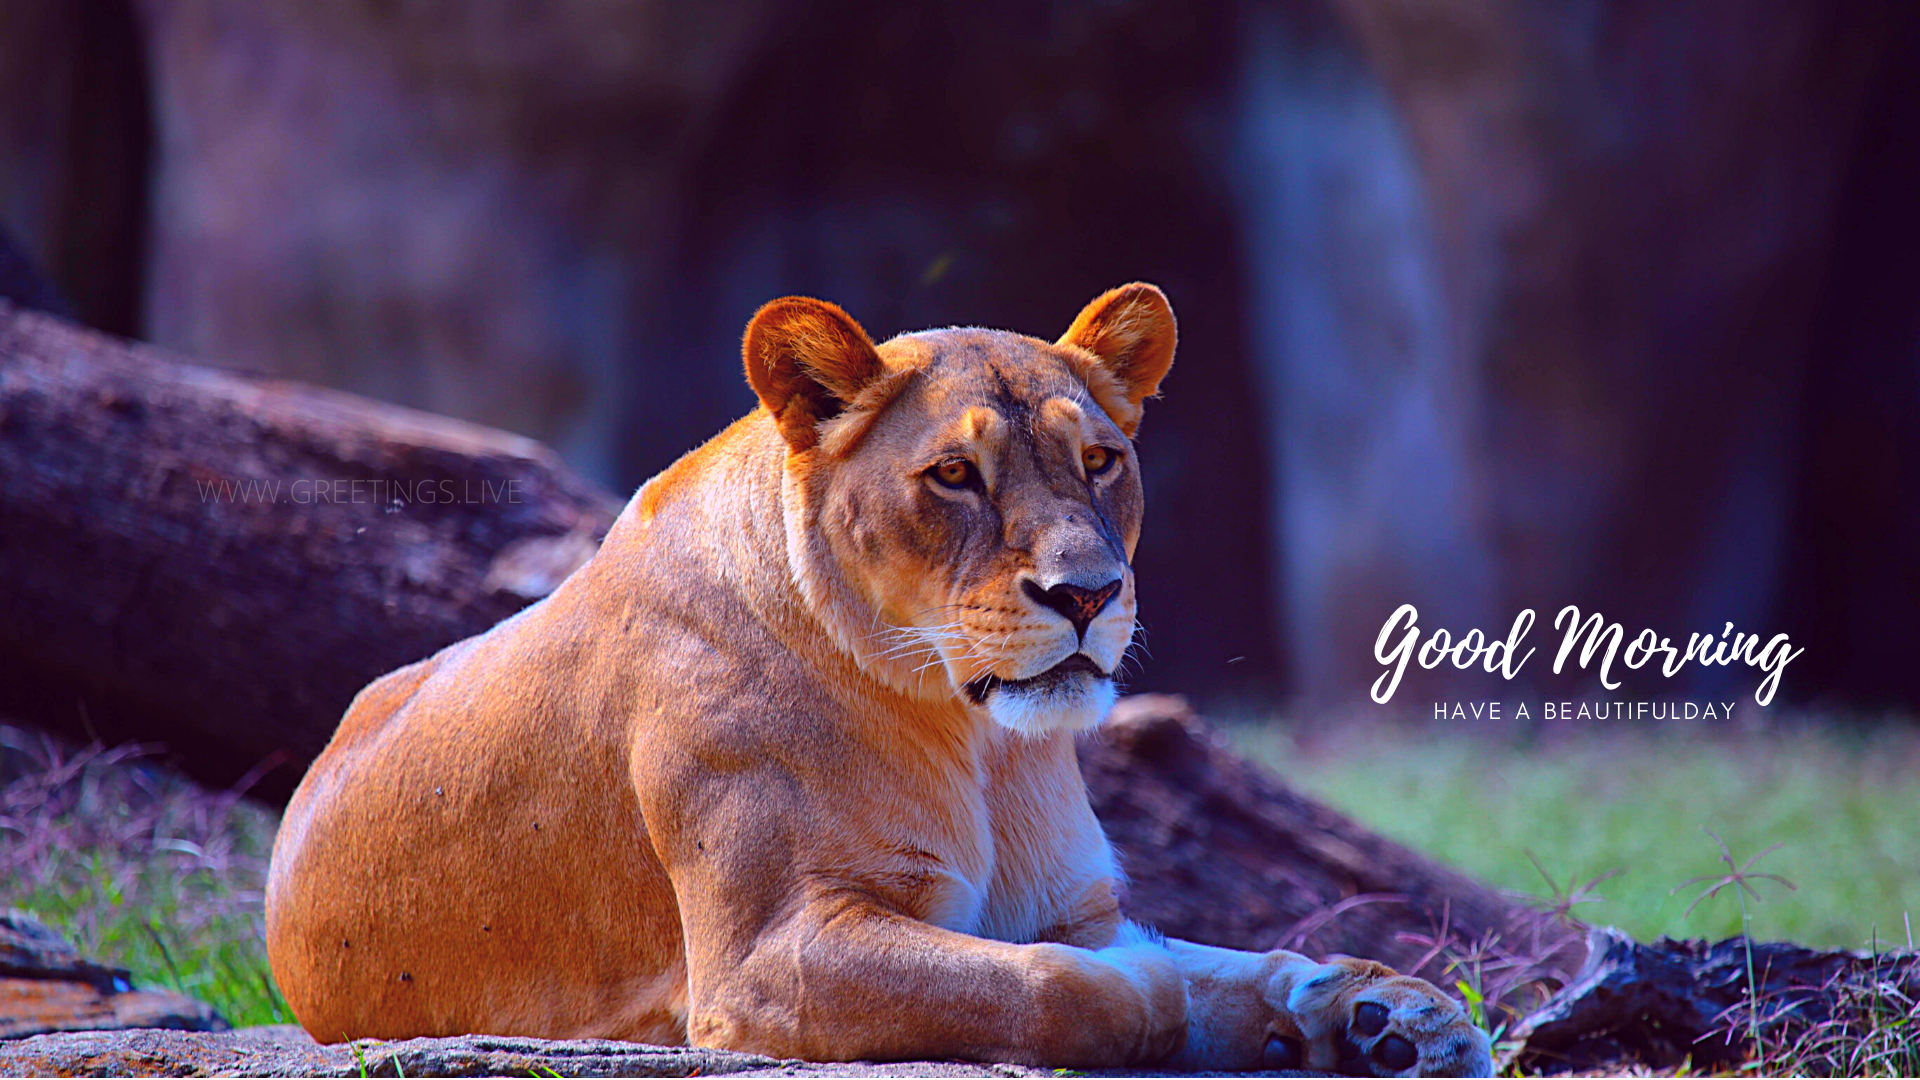 *Free Daily Greetings Pictures Festival GIF Images: lioness  wild animal greetings good morning wishes